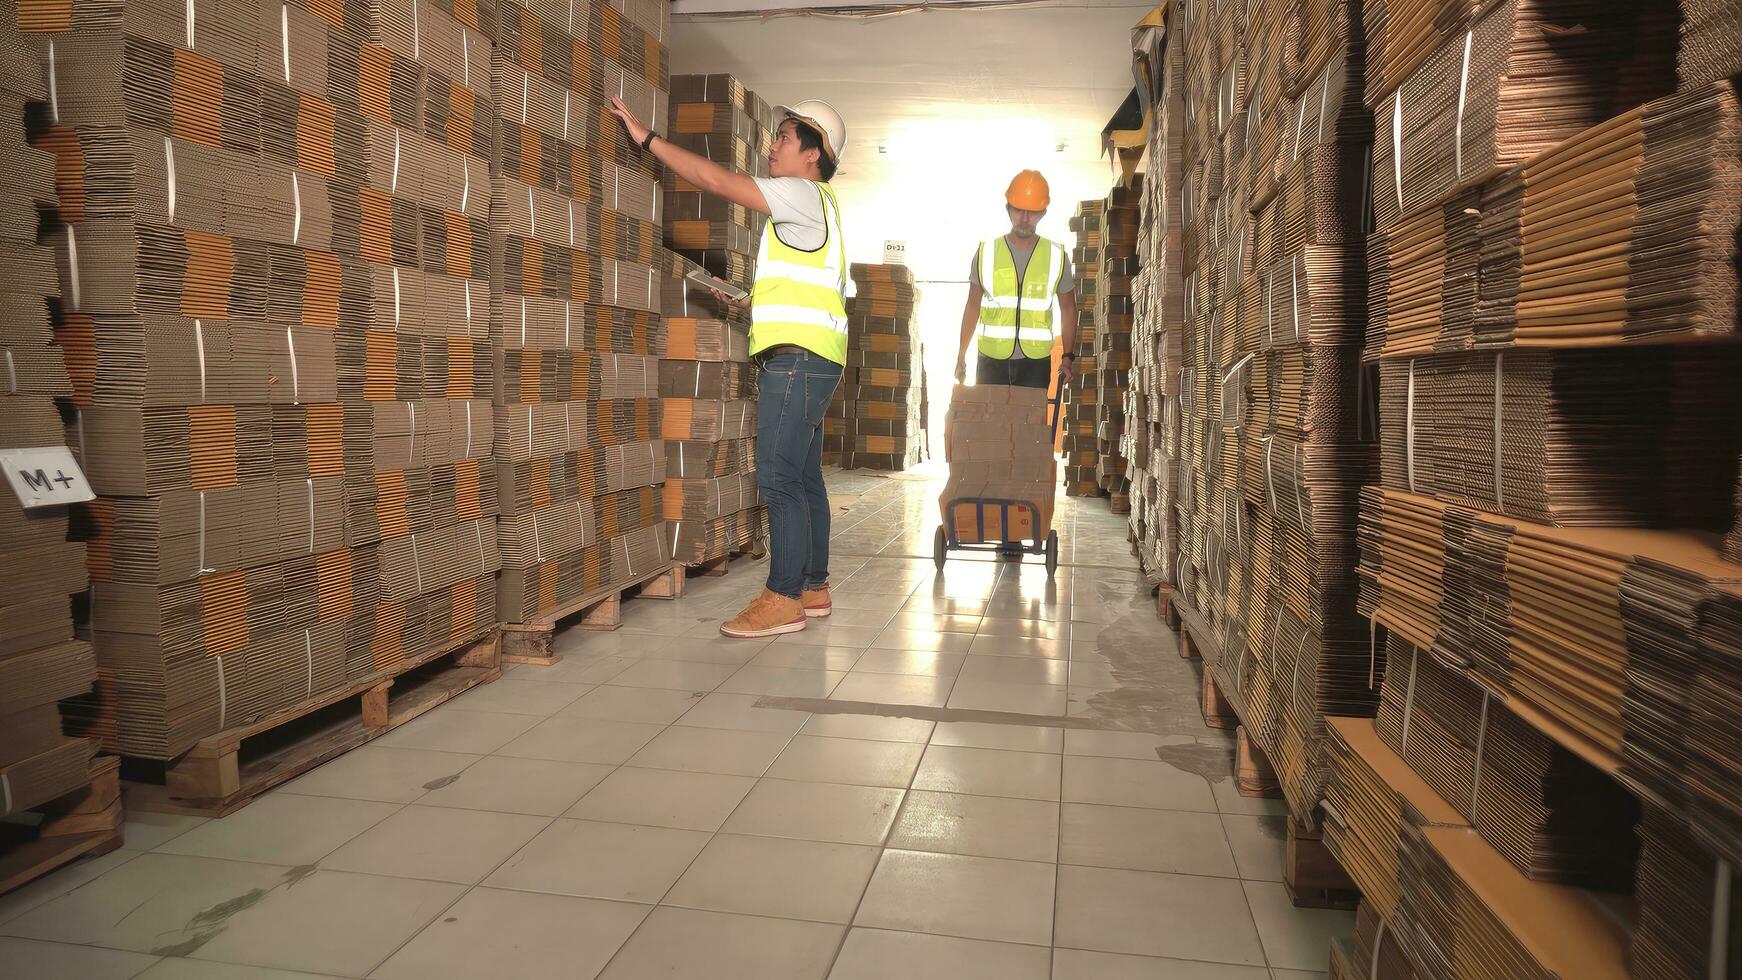 Worker Unloading Cardboard Boxes on Hand Online Orders, Purchases, E-Commerce Goods. Logistics Distributions Warehouse. photo